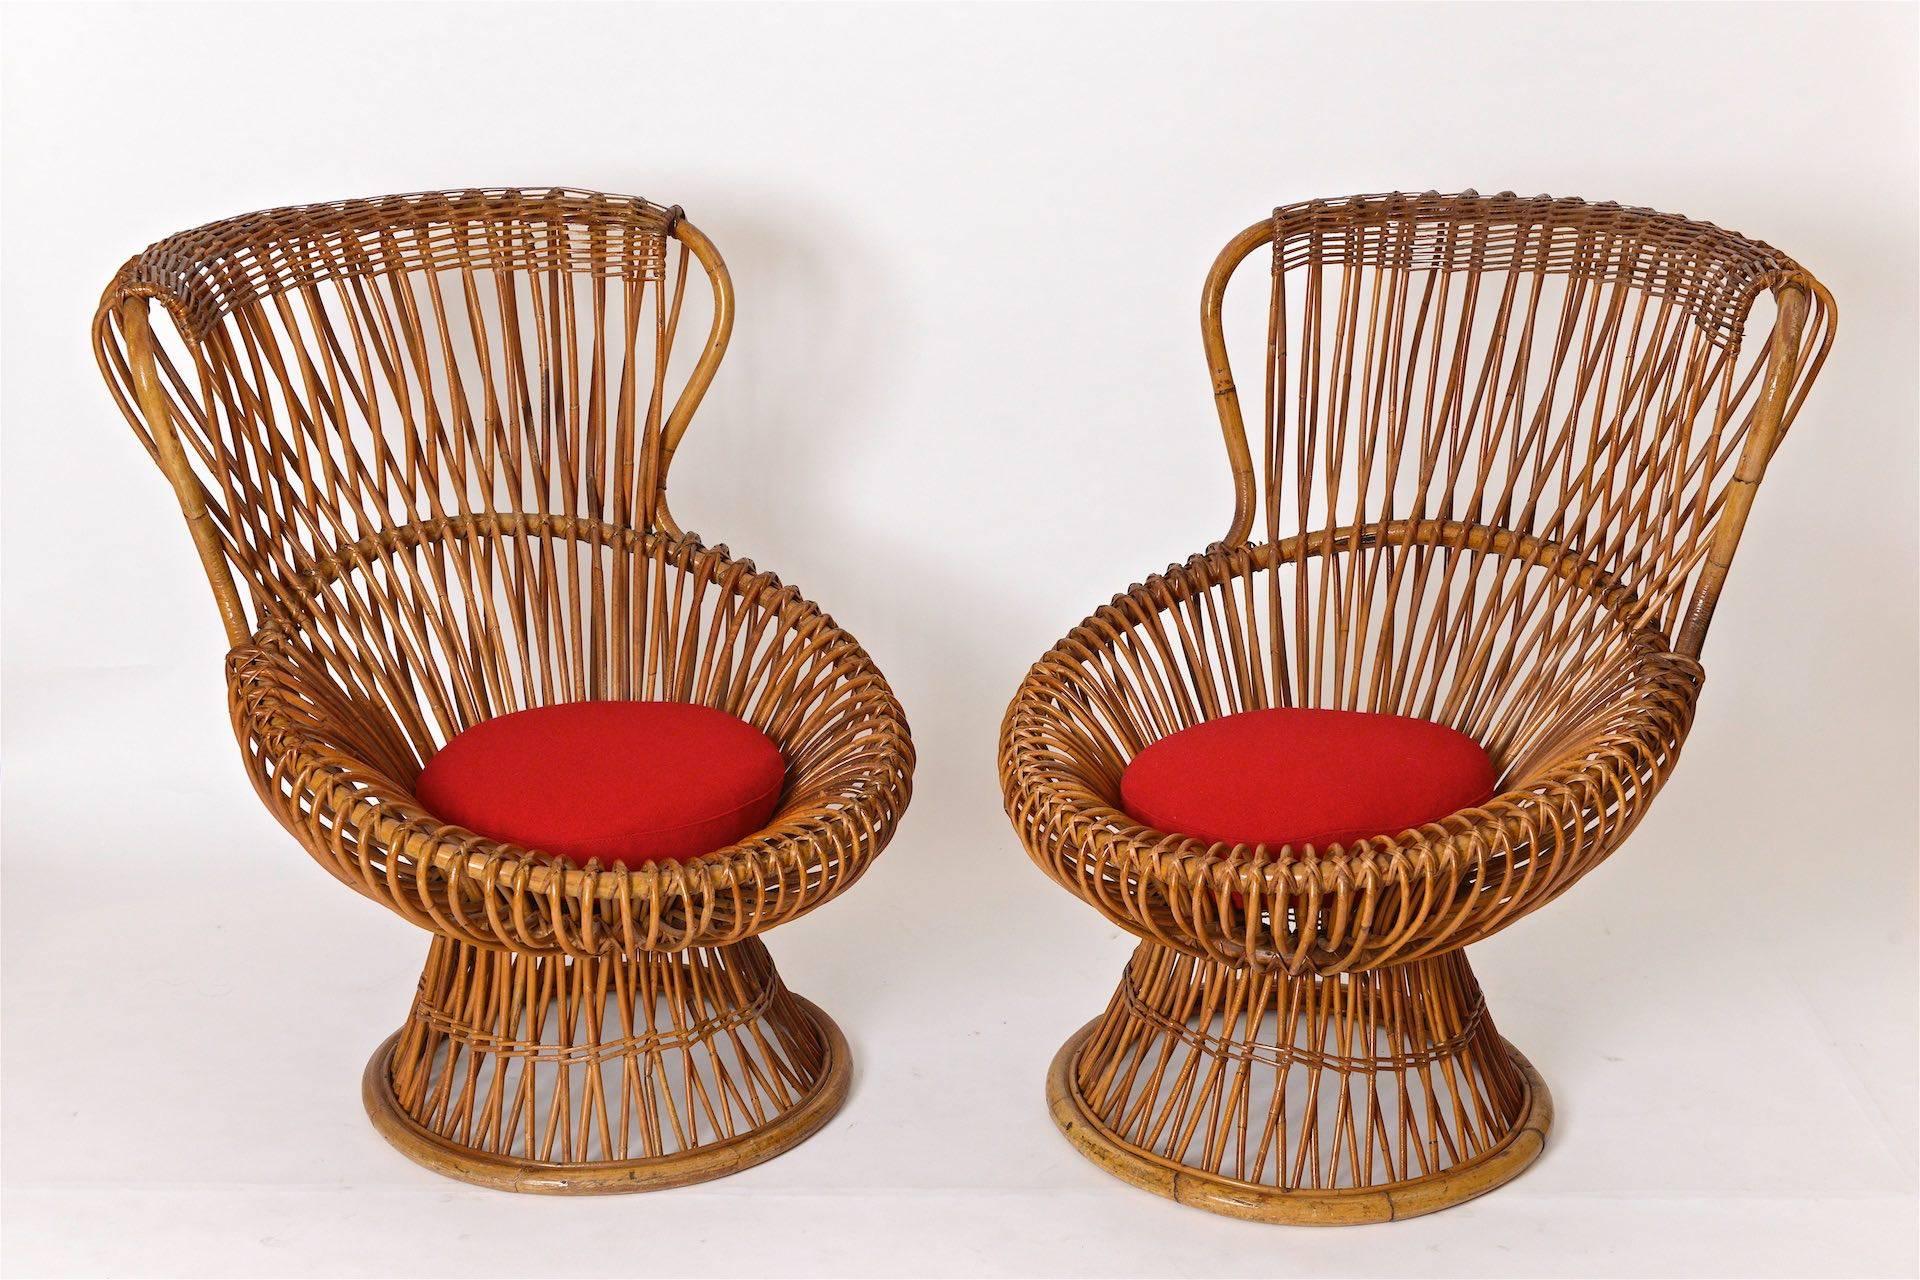 Pair of Franco Albini rattan chairs. Lovely ageing to rattan and in wonderful condition. Seat cushion re upholster in red wool.

The chair design won the 9th Milan Triennale in 1951

